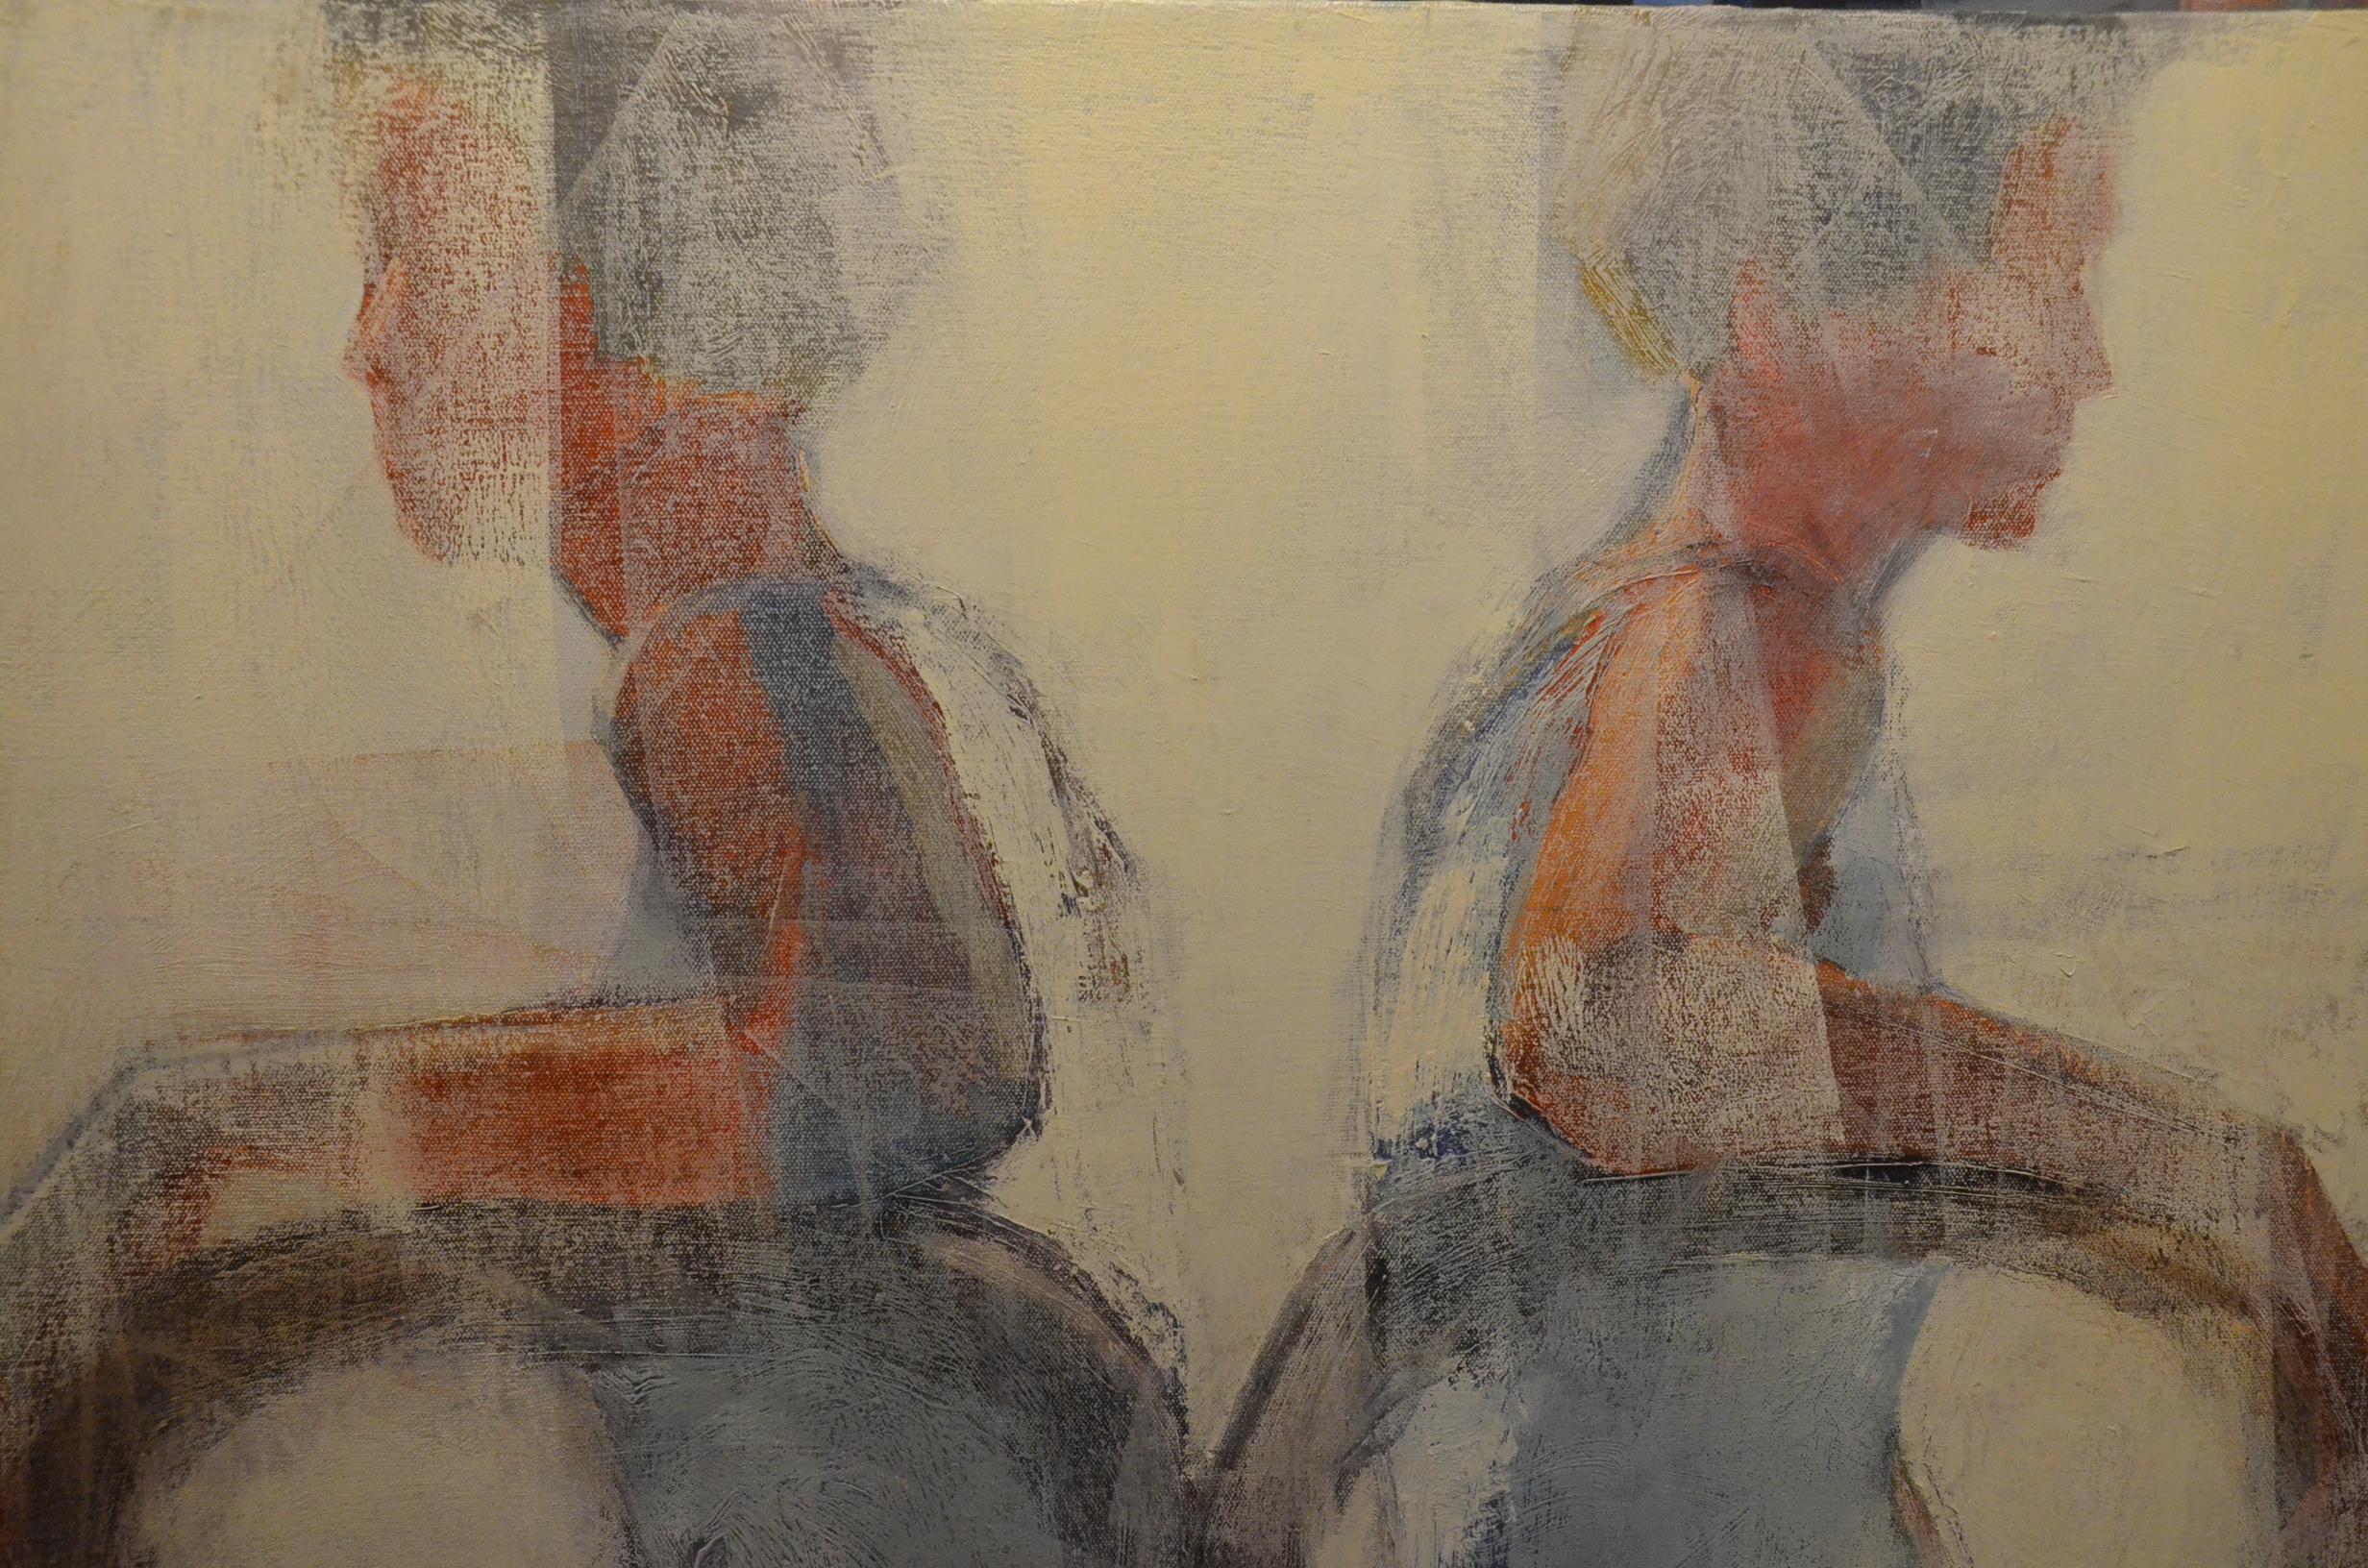 Window, Mid Century, Female Figure in Light, Abstract, Neutral Tones - Feminist Painting by Melinda Cootsona